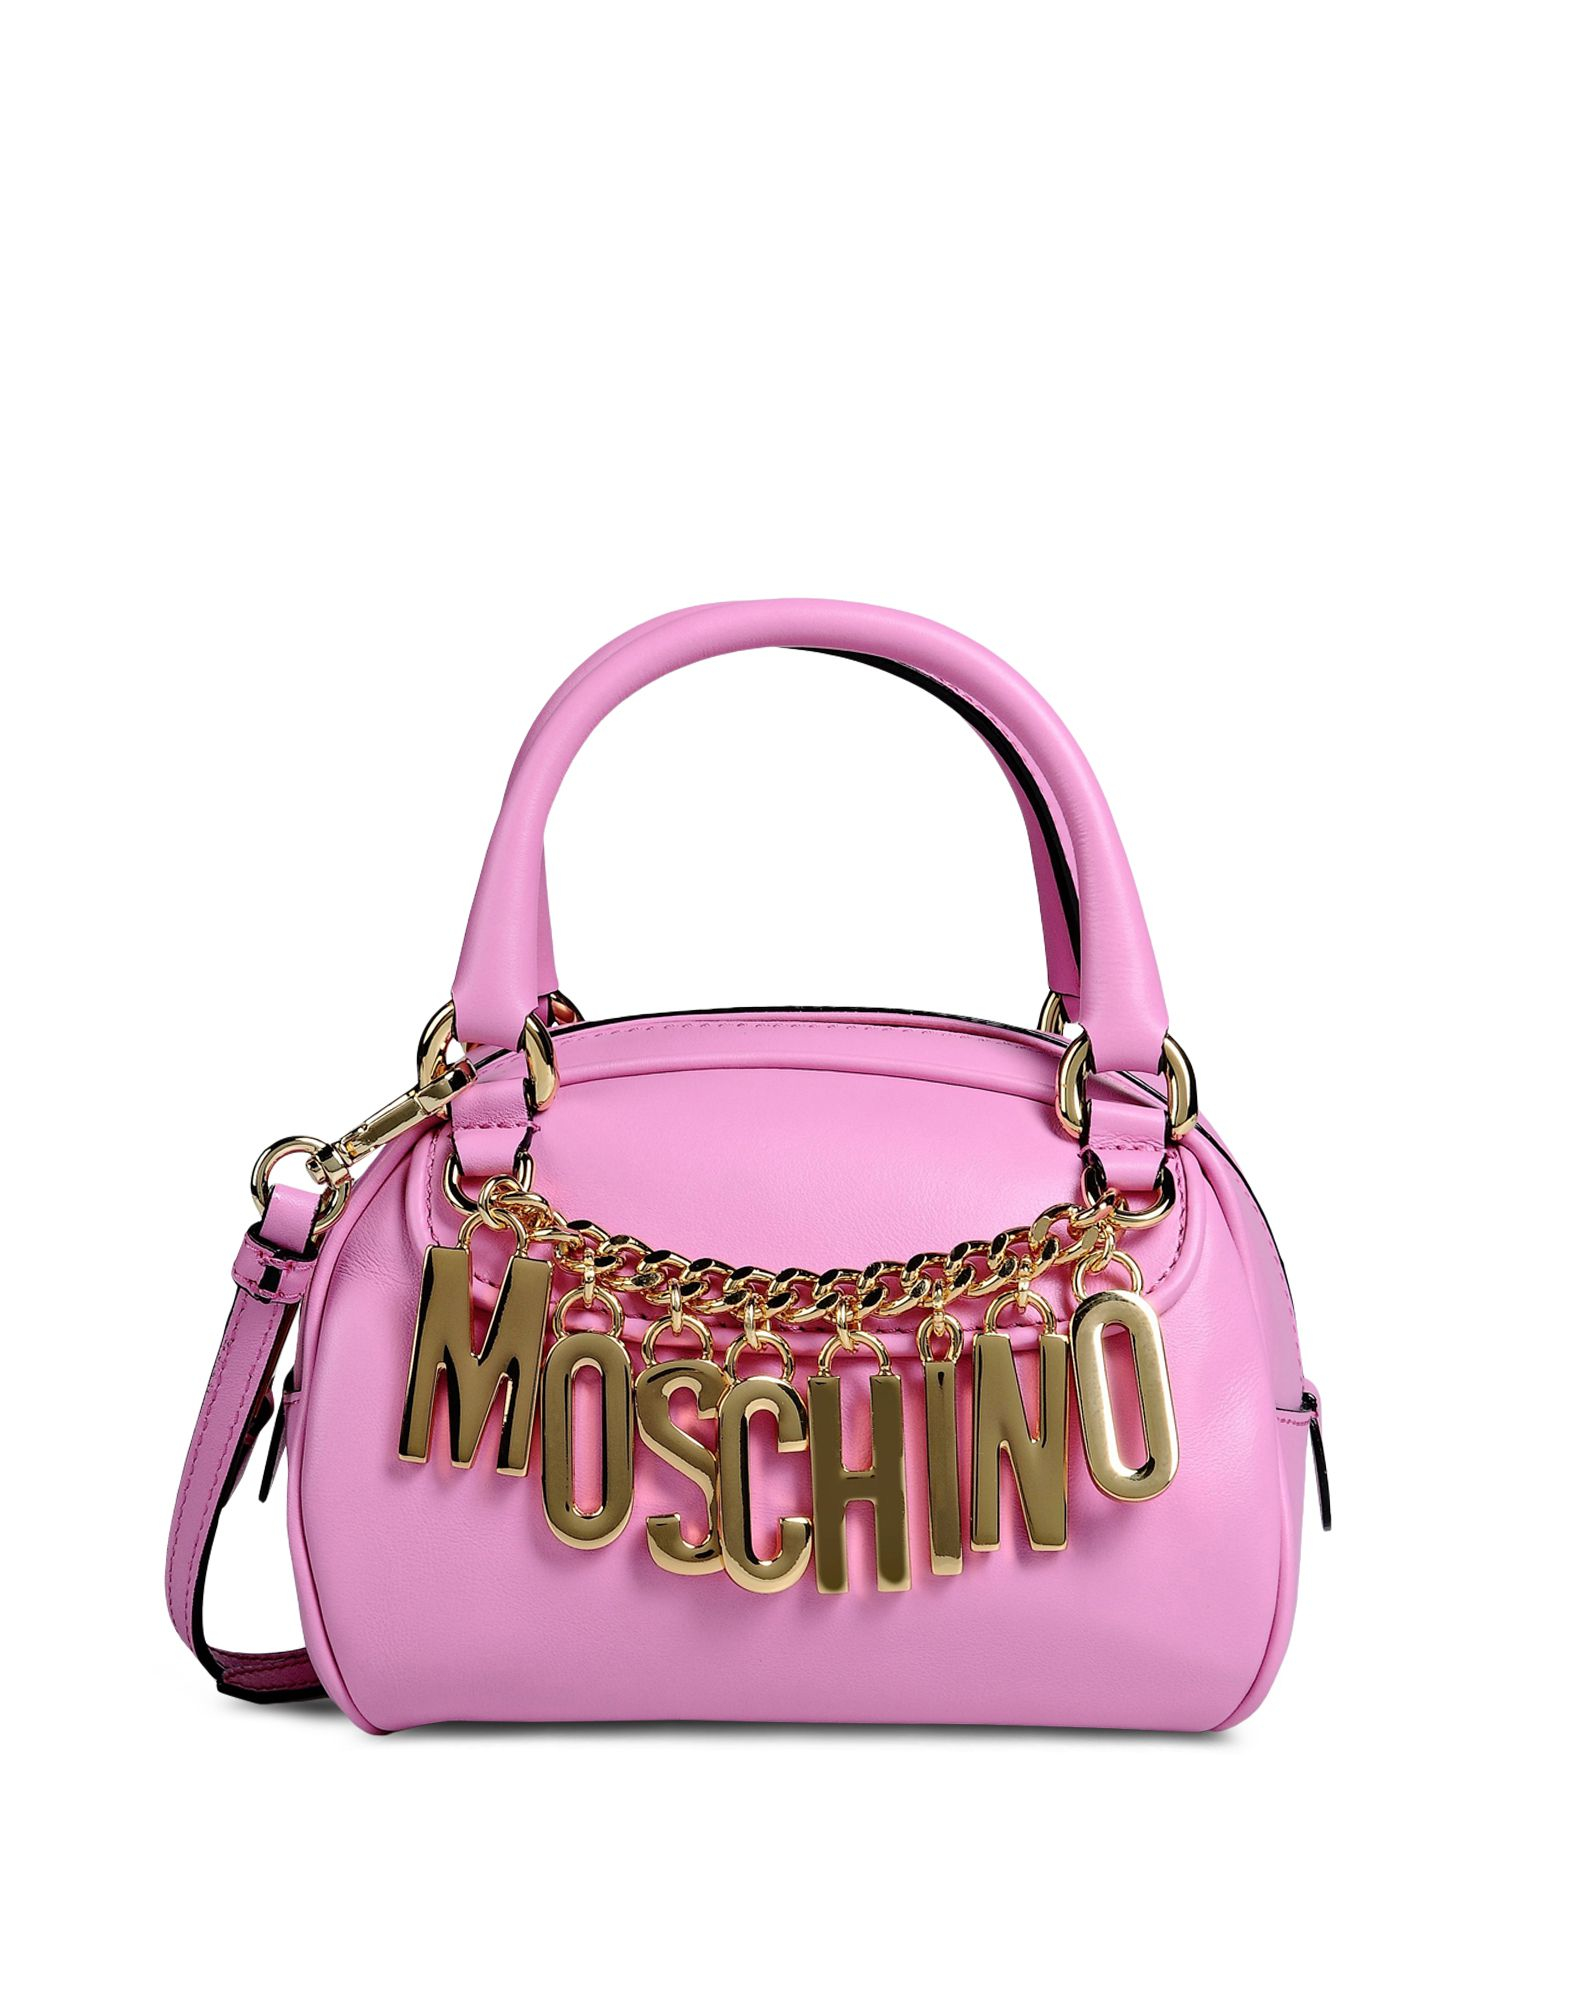 Lyst - Moschino Small Leather Bag in Pink